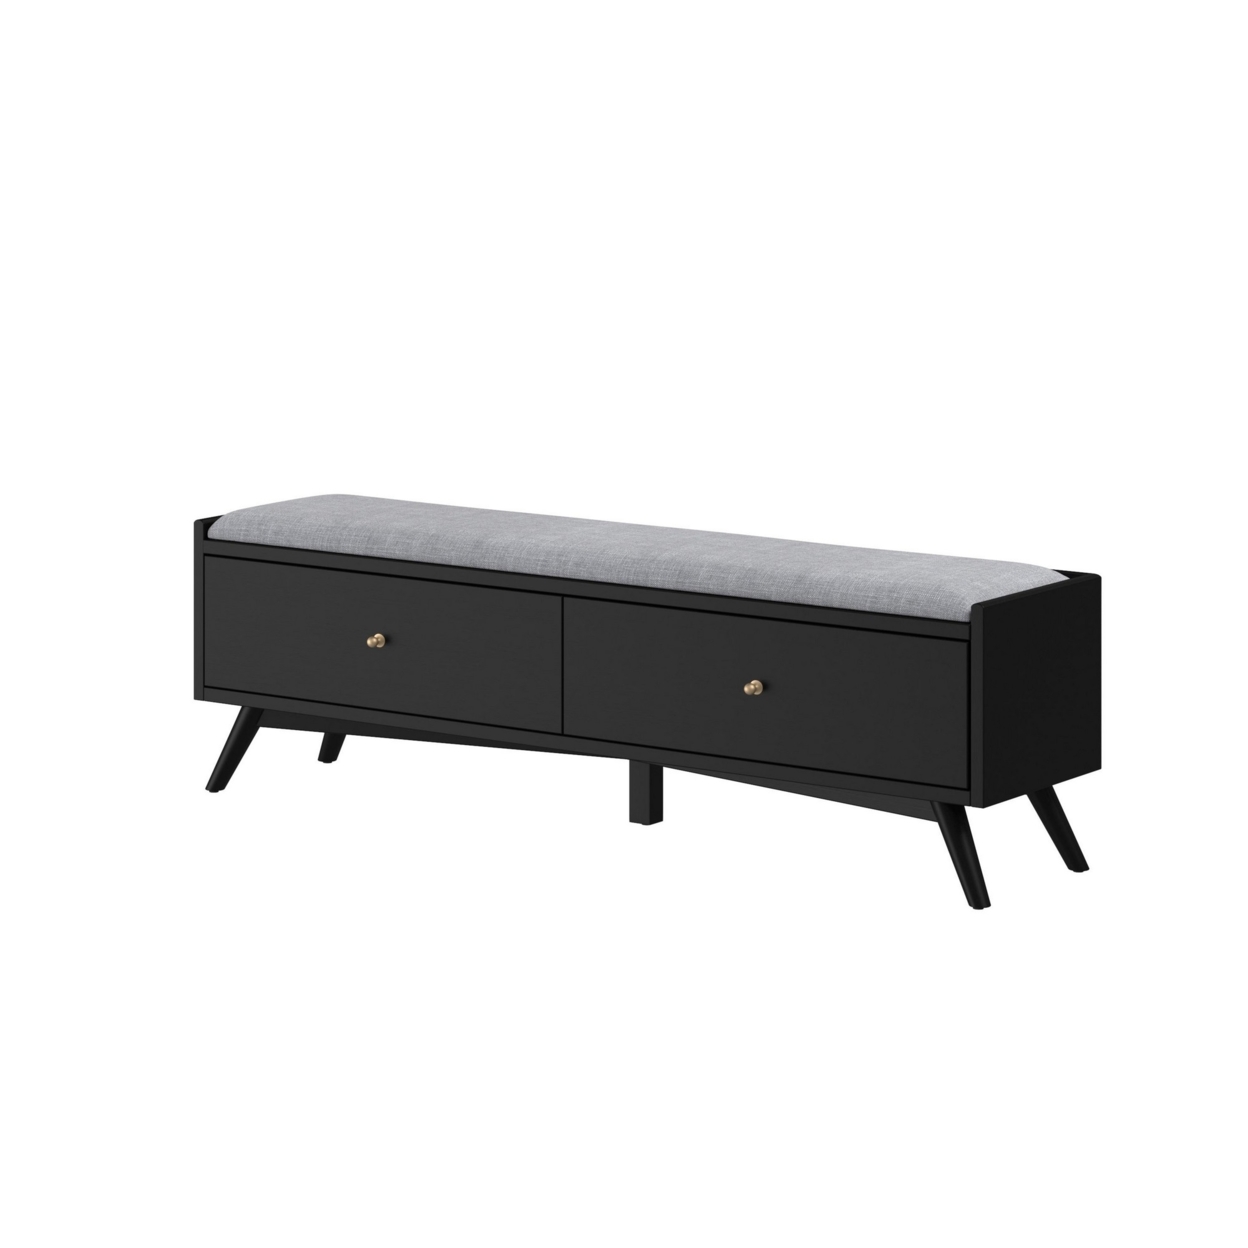 Bench With Fabric Padded Seat And 2 Drawers, Black- Saltoro Sherpi